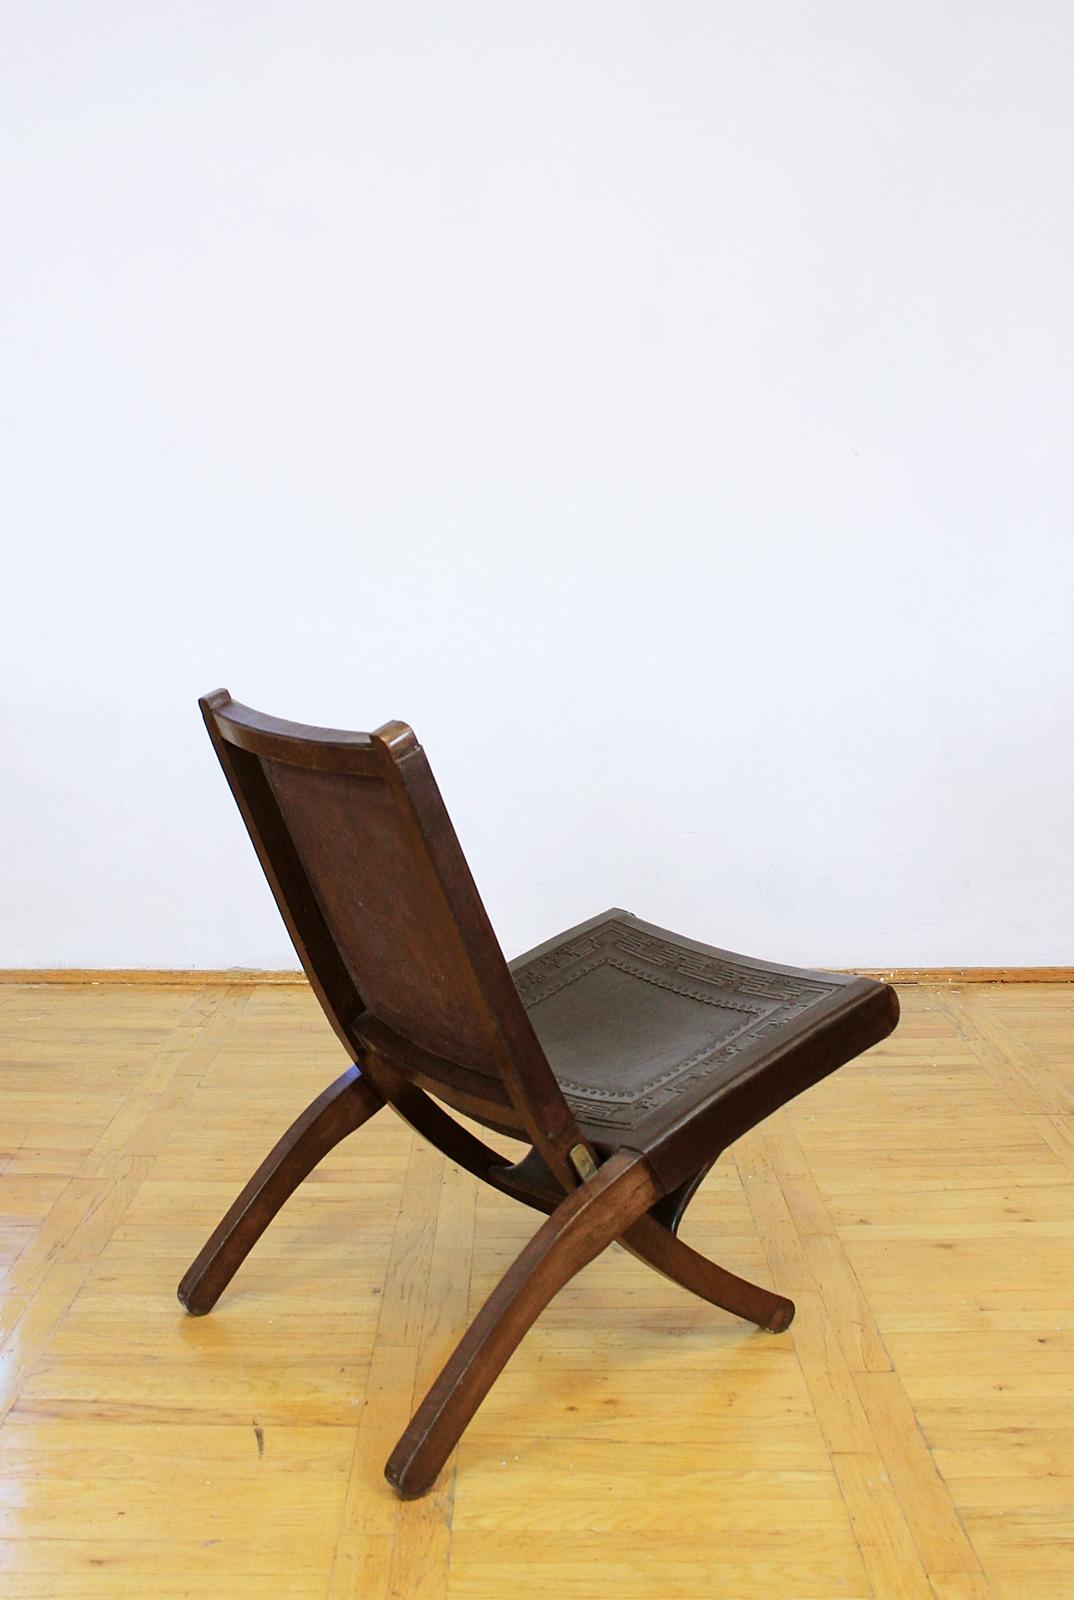 20th Century Midcentury Peruvian Tooled Leather Folding Chair, 1970